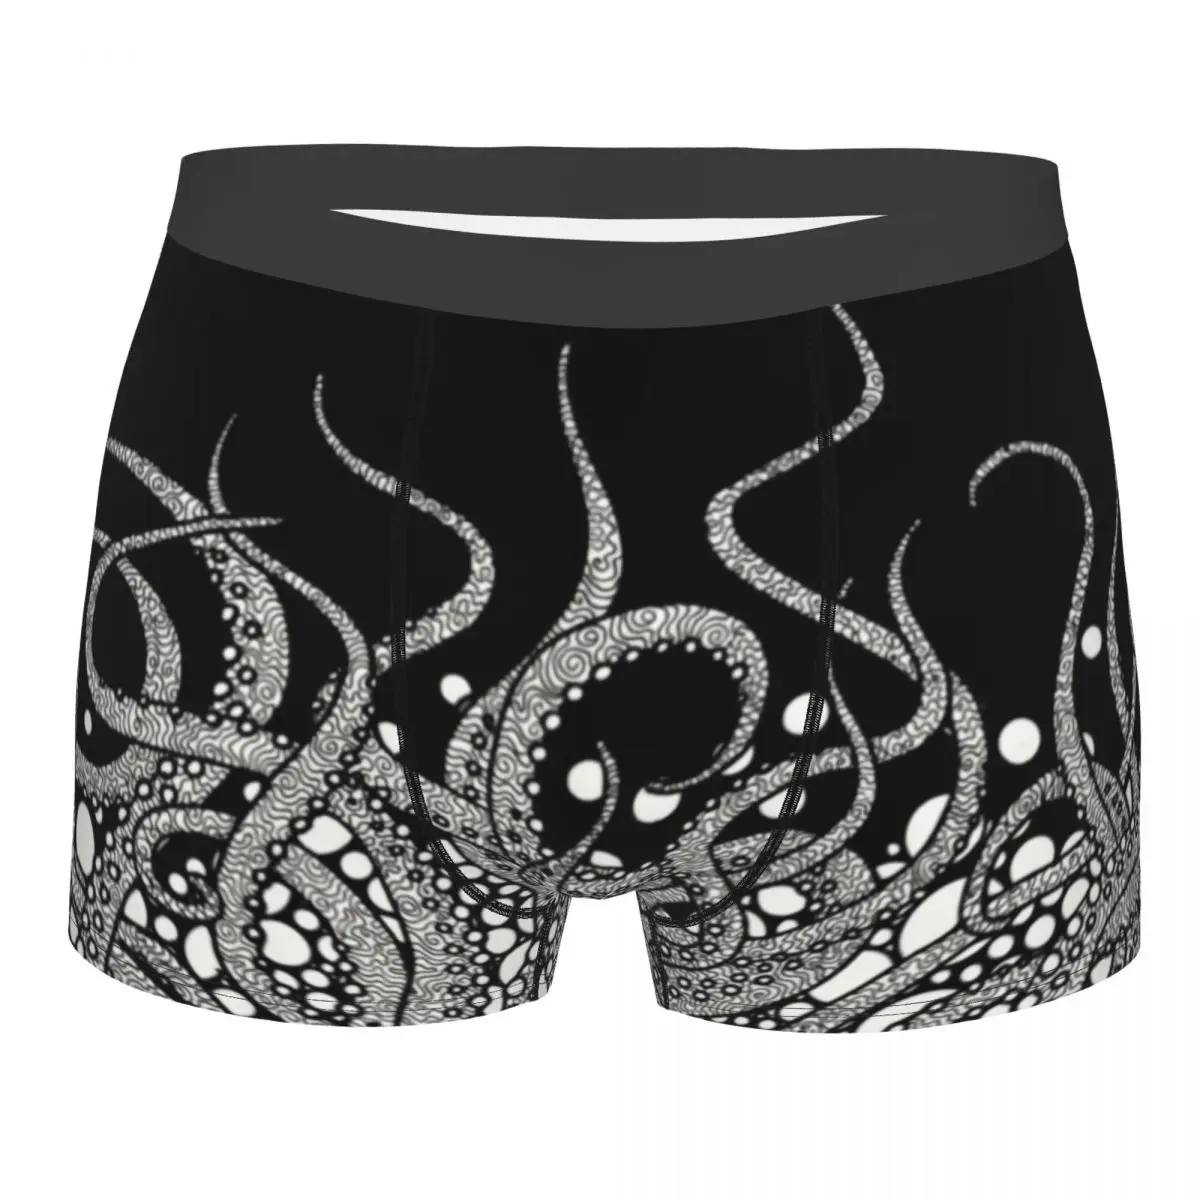 

Fashion Horror Monster Tentacles Cthulhu Boxers Shorts Underpants Men's Stretch Briefs Underwear